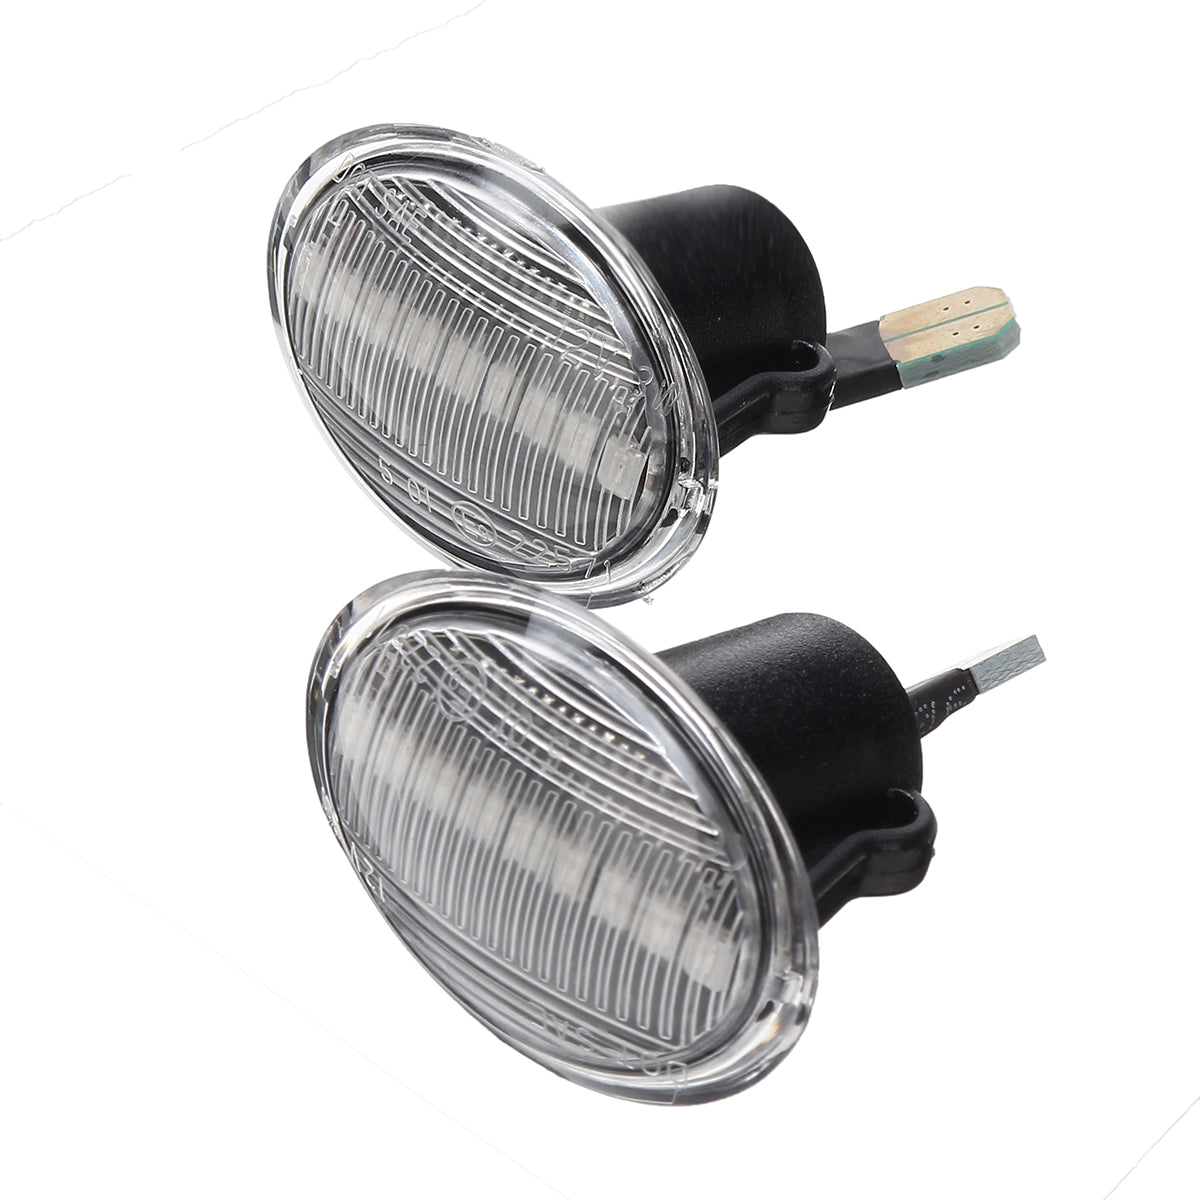 Dark Gray 2PCS LED Side Marker Lights Indicator Repeaters Bulbs Amber for Fiat 500 500c Abarth